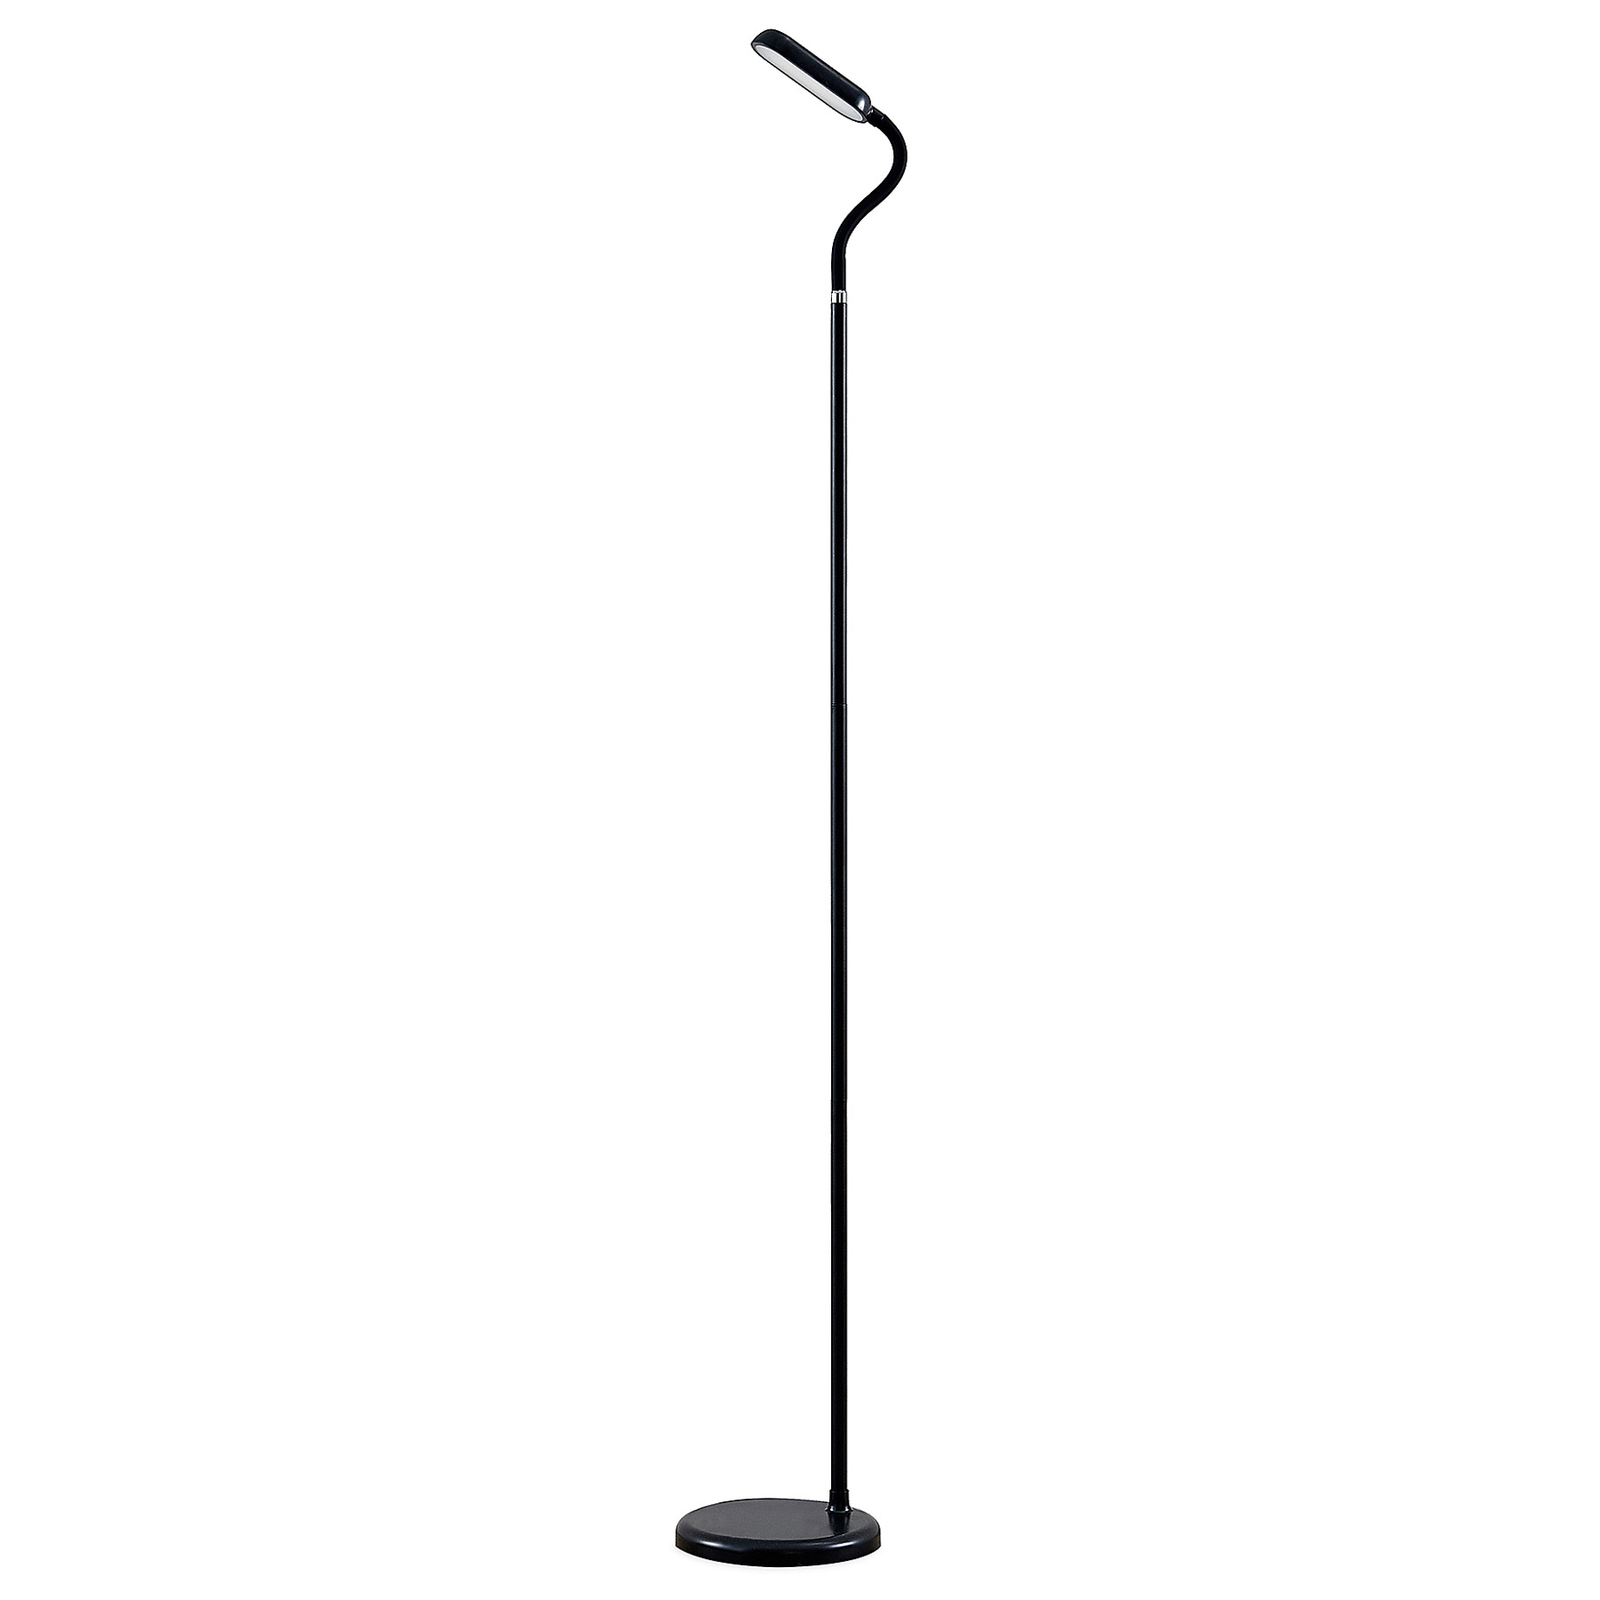 Prios Omirino LED floor lamp, dimmable with CCT | Lights.co.uk